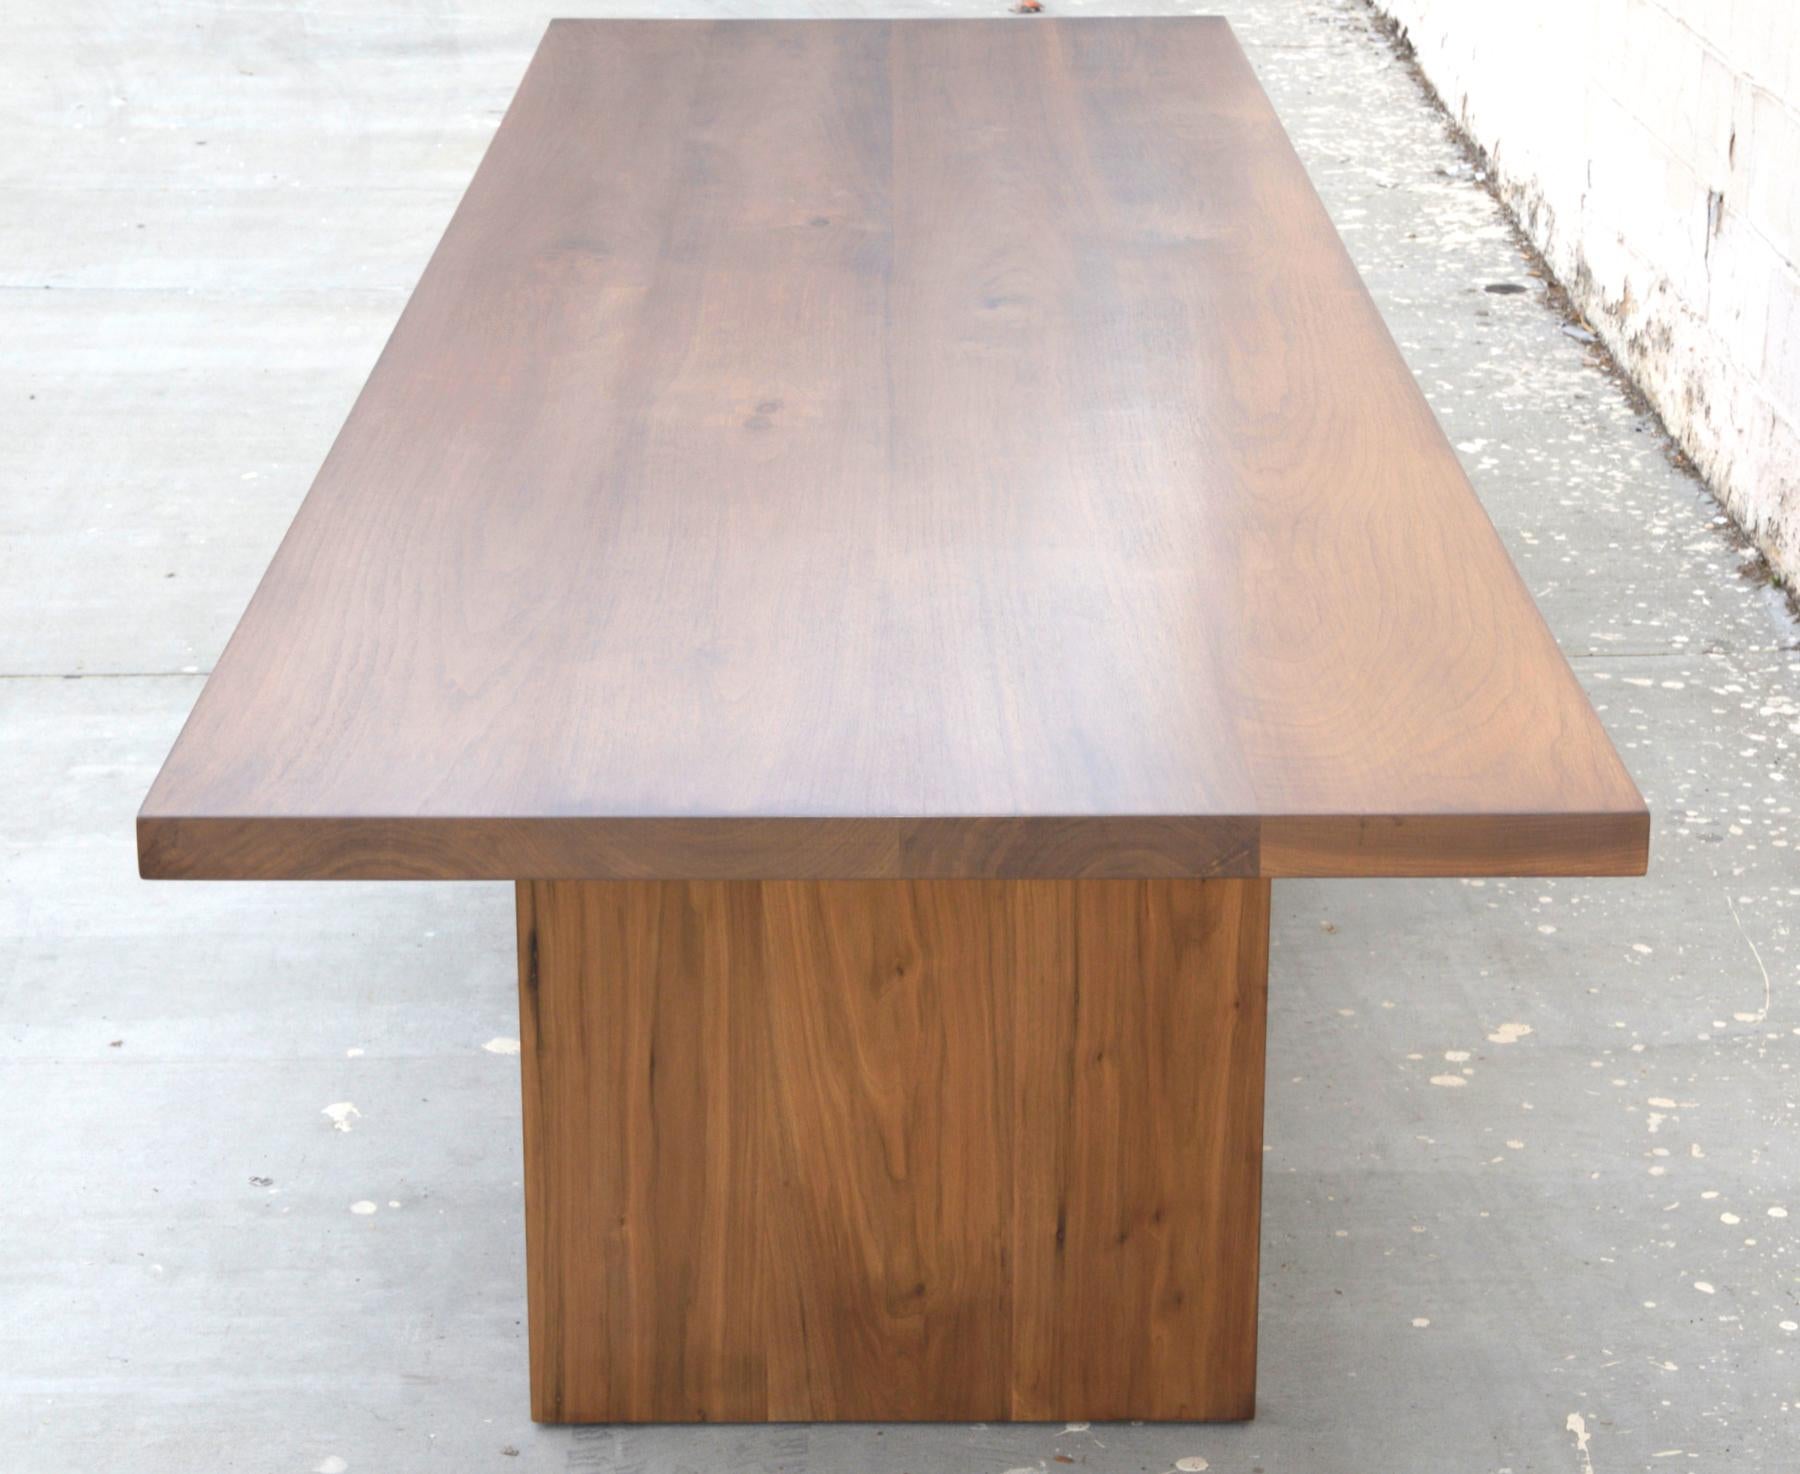 This modern walnut dining table is seen here in 132